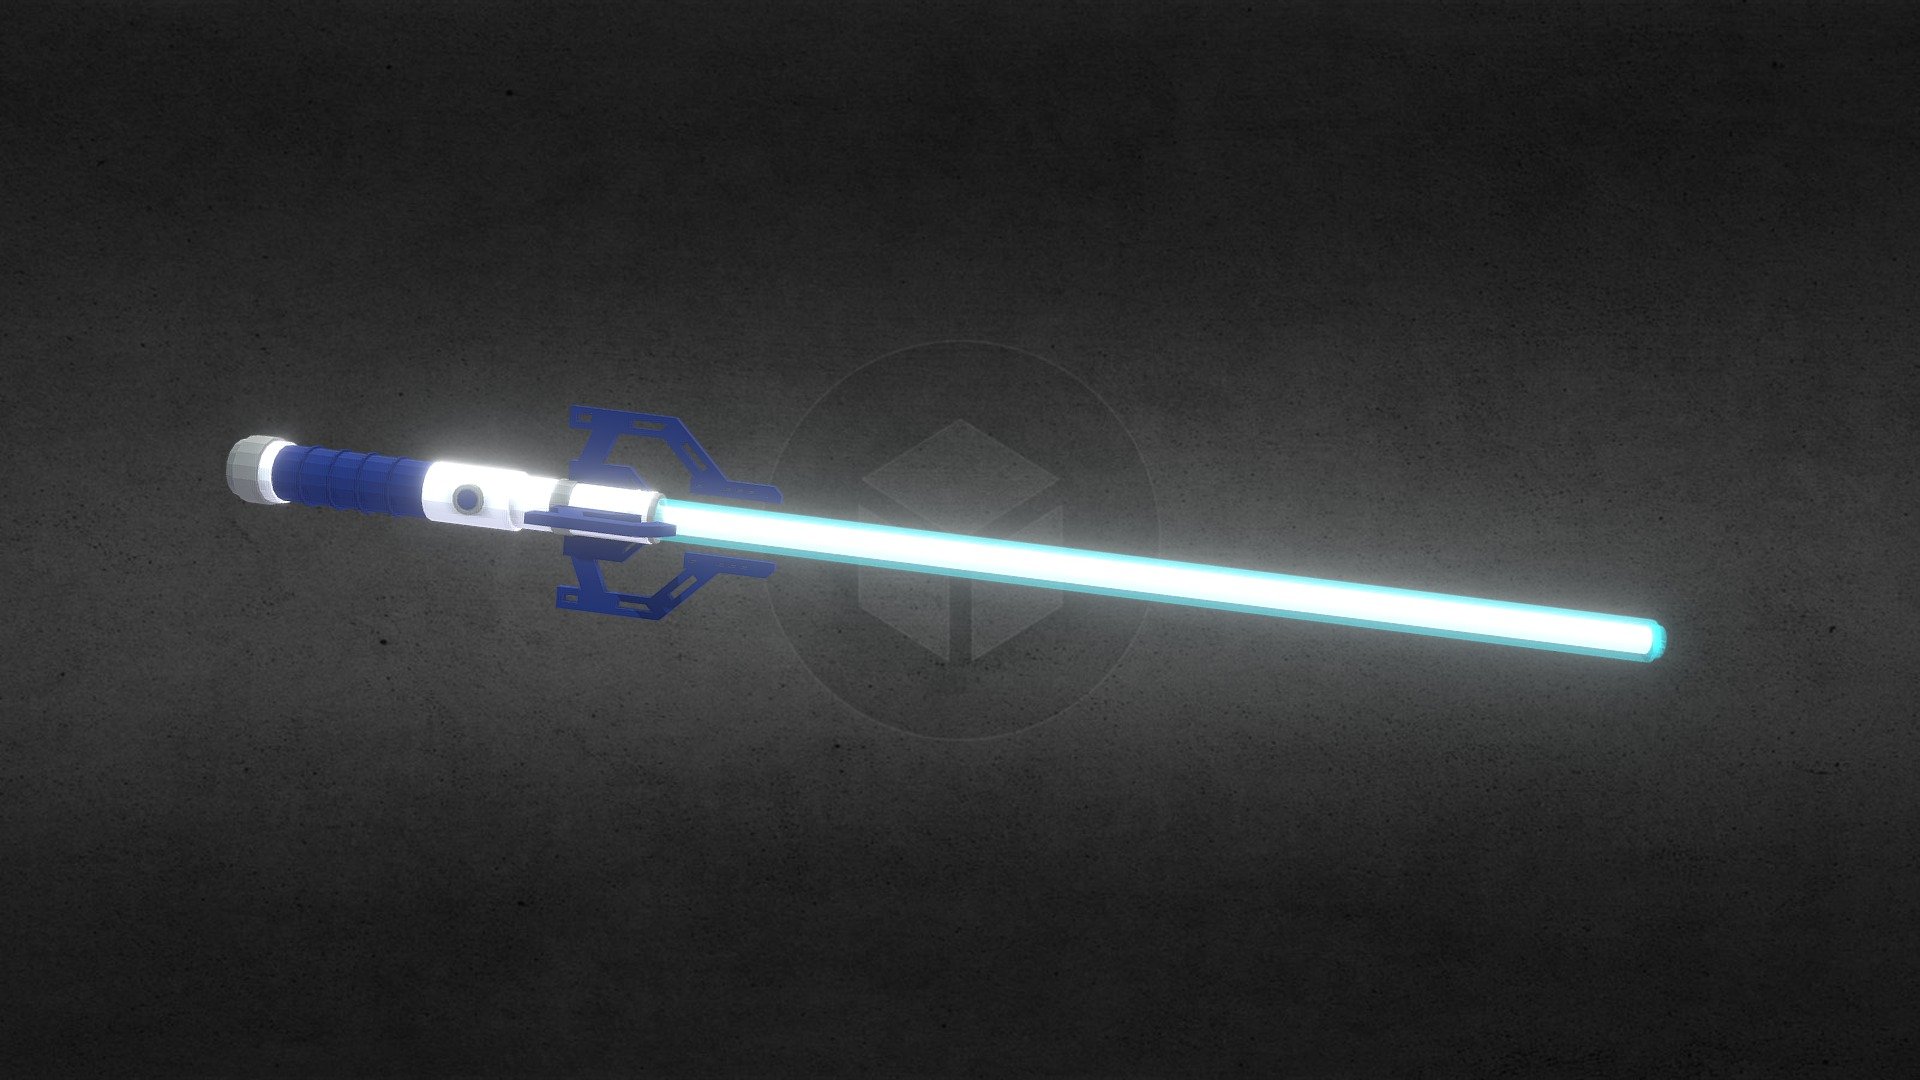 Another lightsaber, inspired by the Saber Forge lightsaber of the same name.
Made for my server 3d model